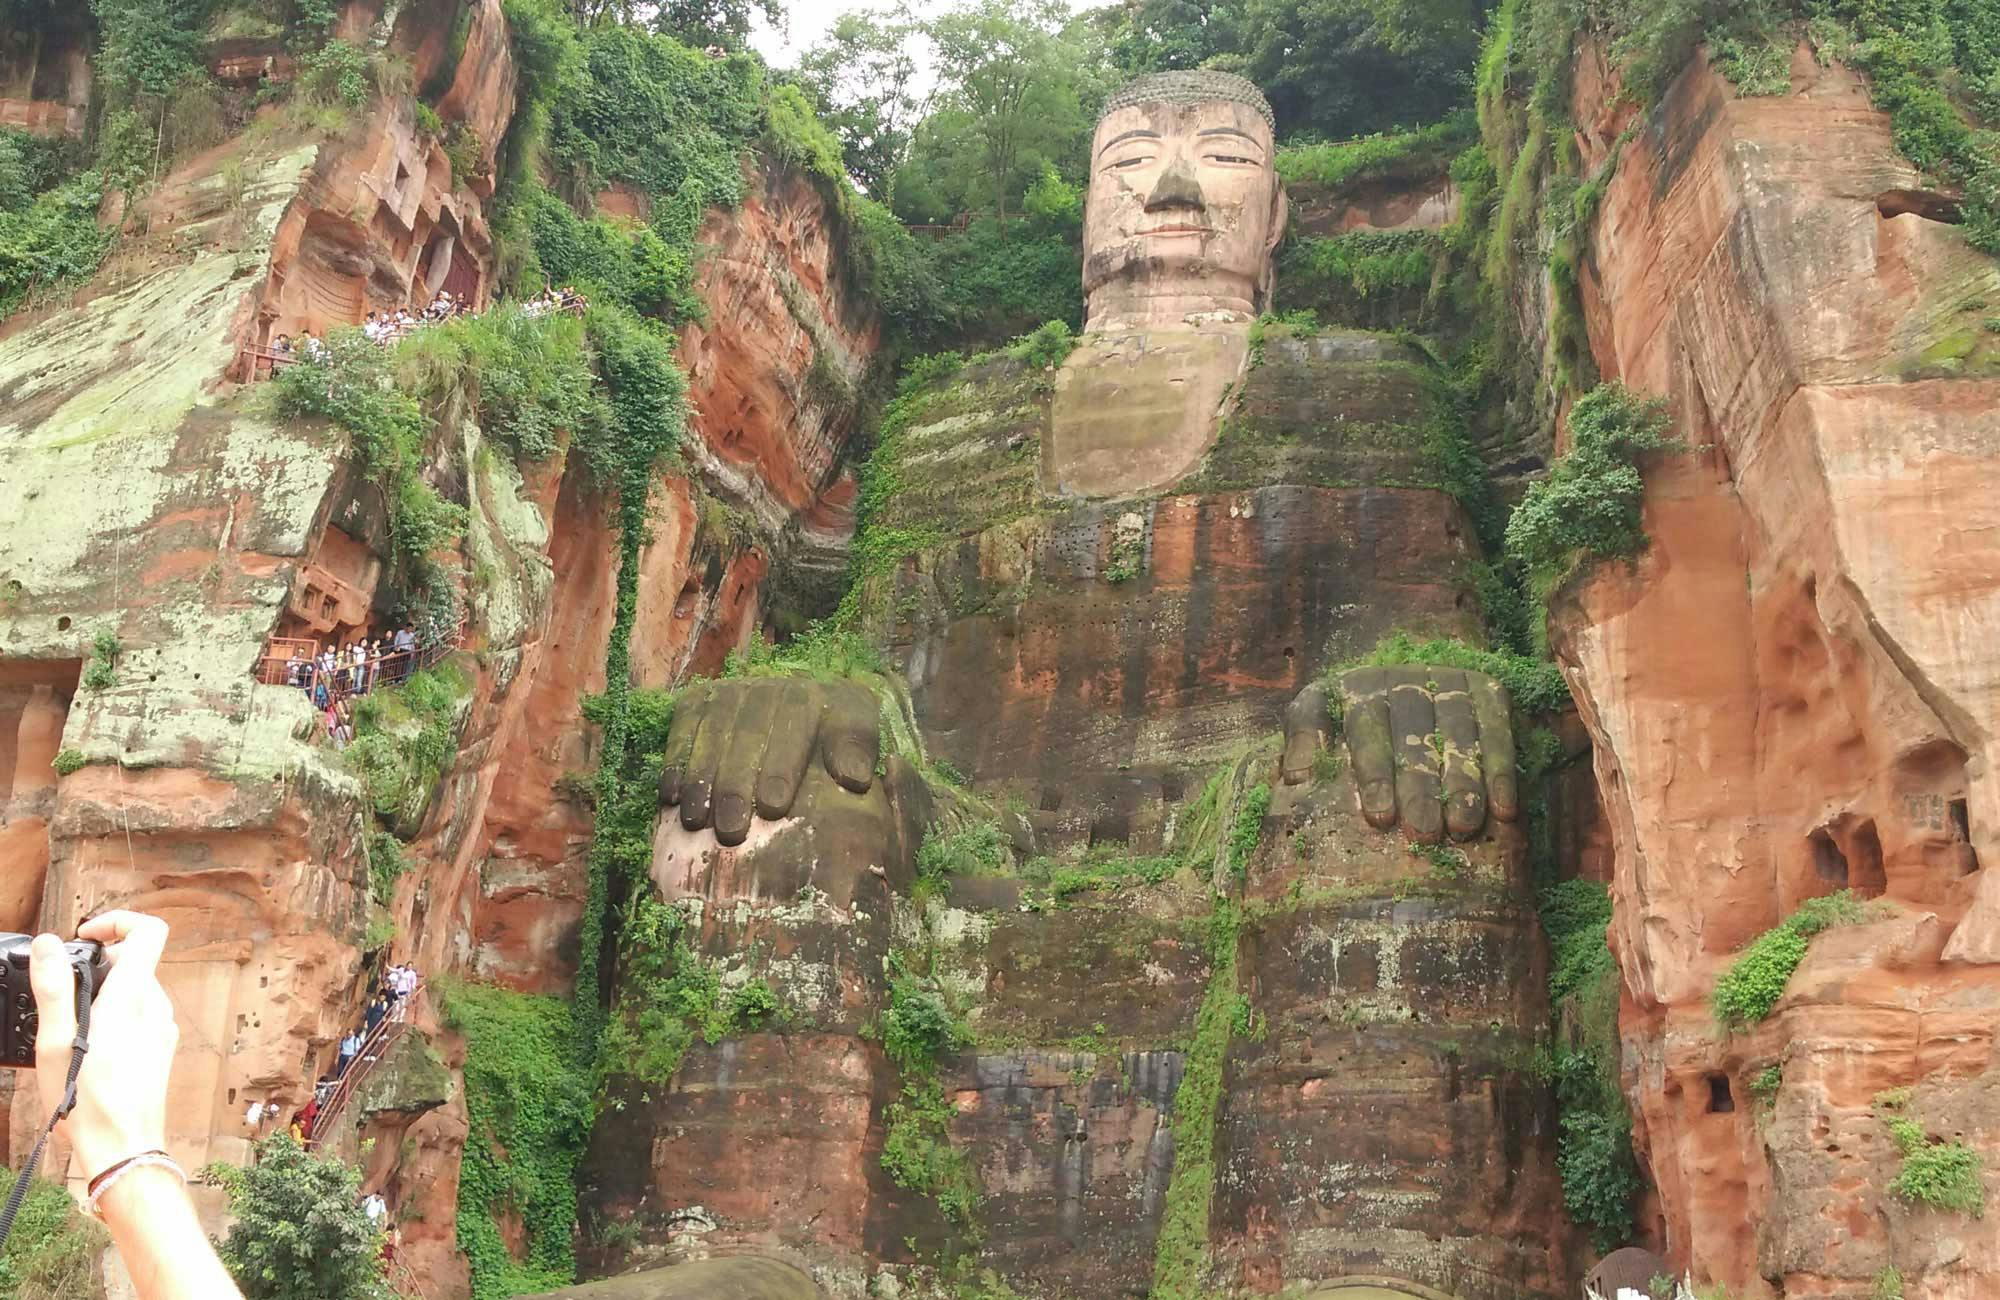 Full day private tour of Leshan Giant Buddha with lunch